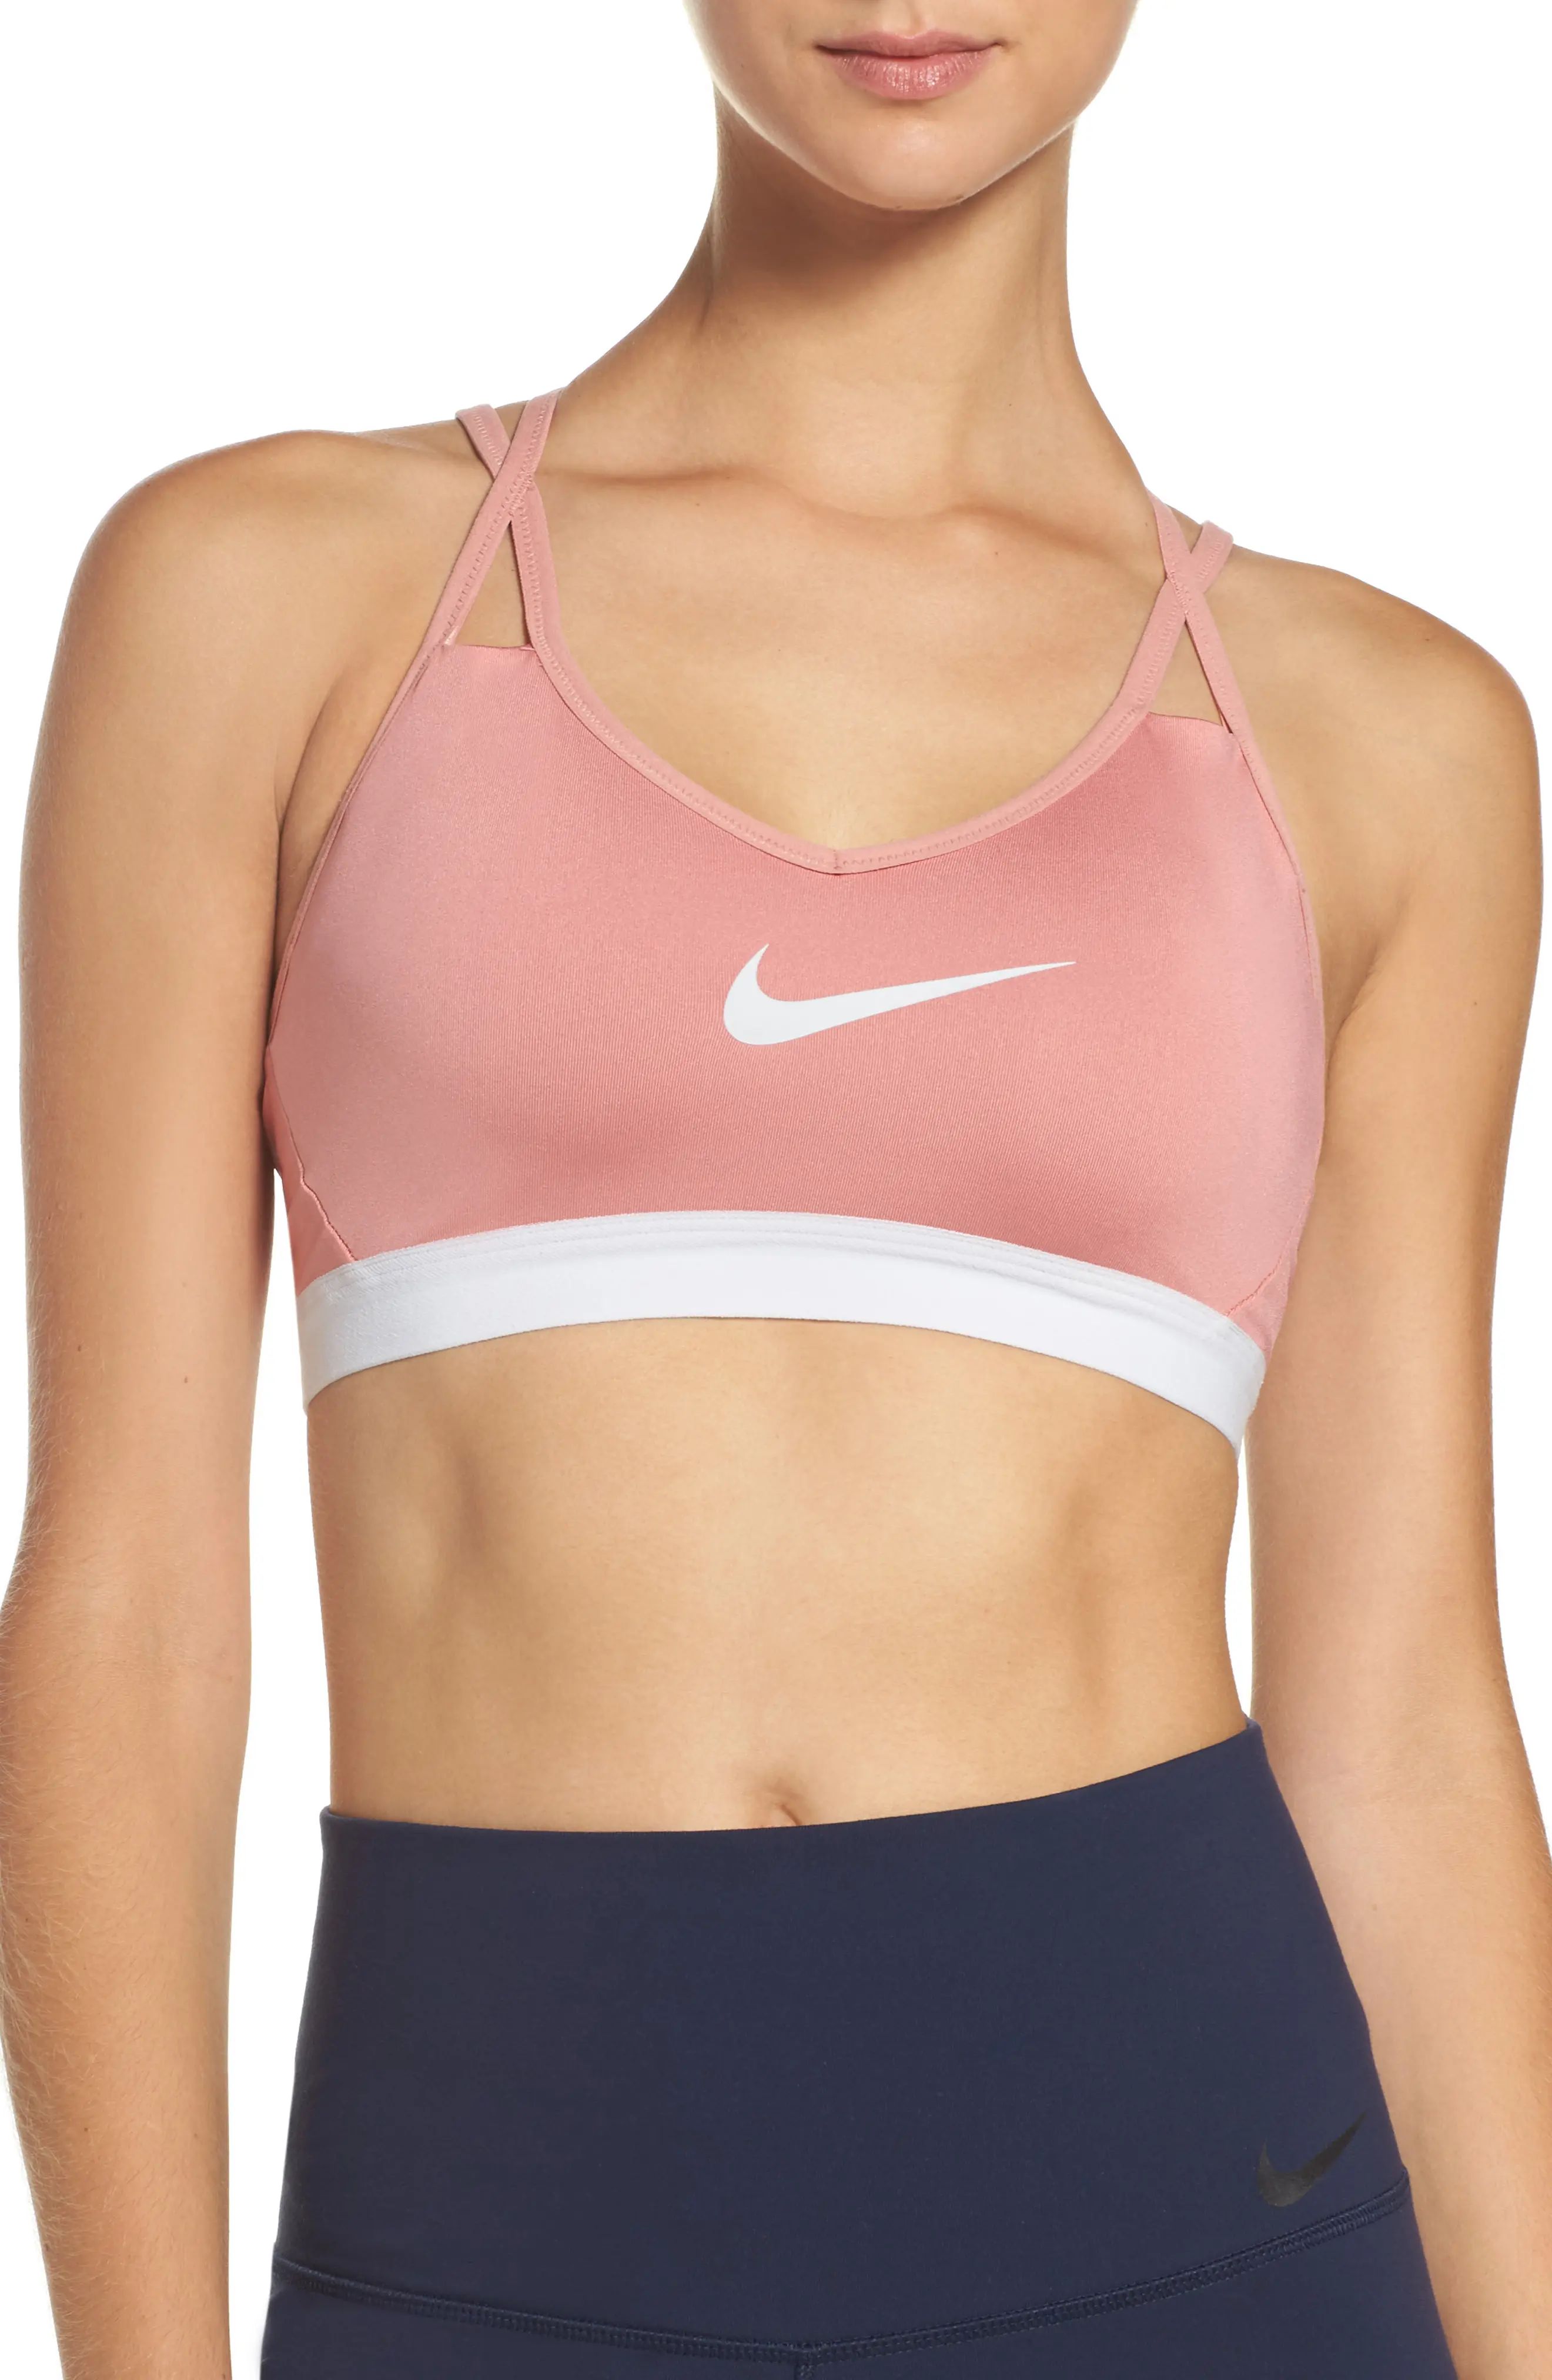 Pro Indy Cooling Sports Bra | Nordstrom